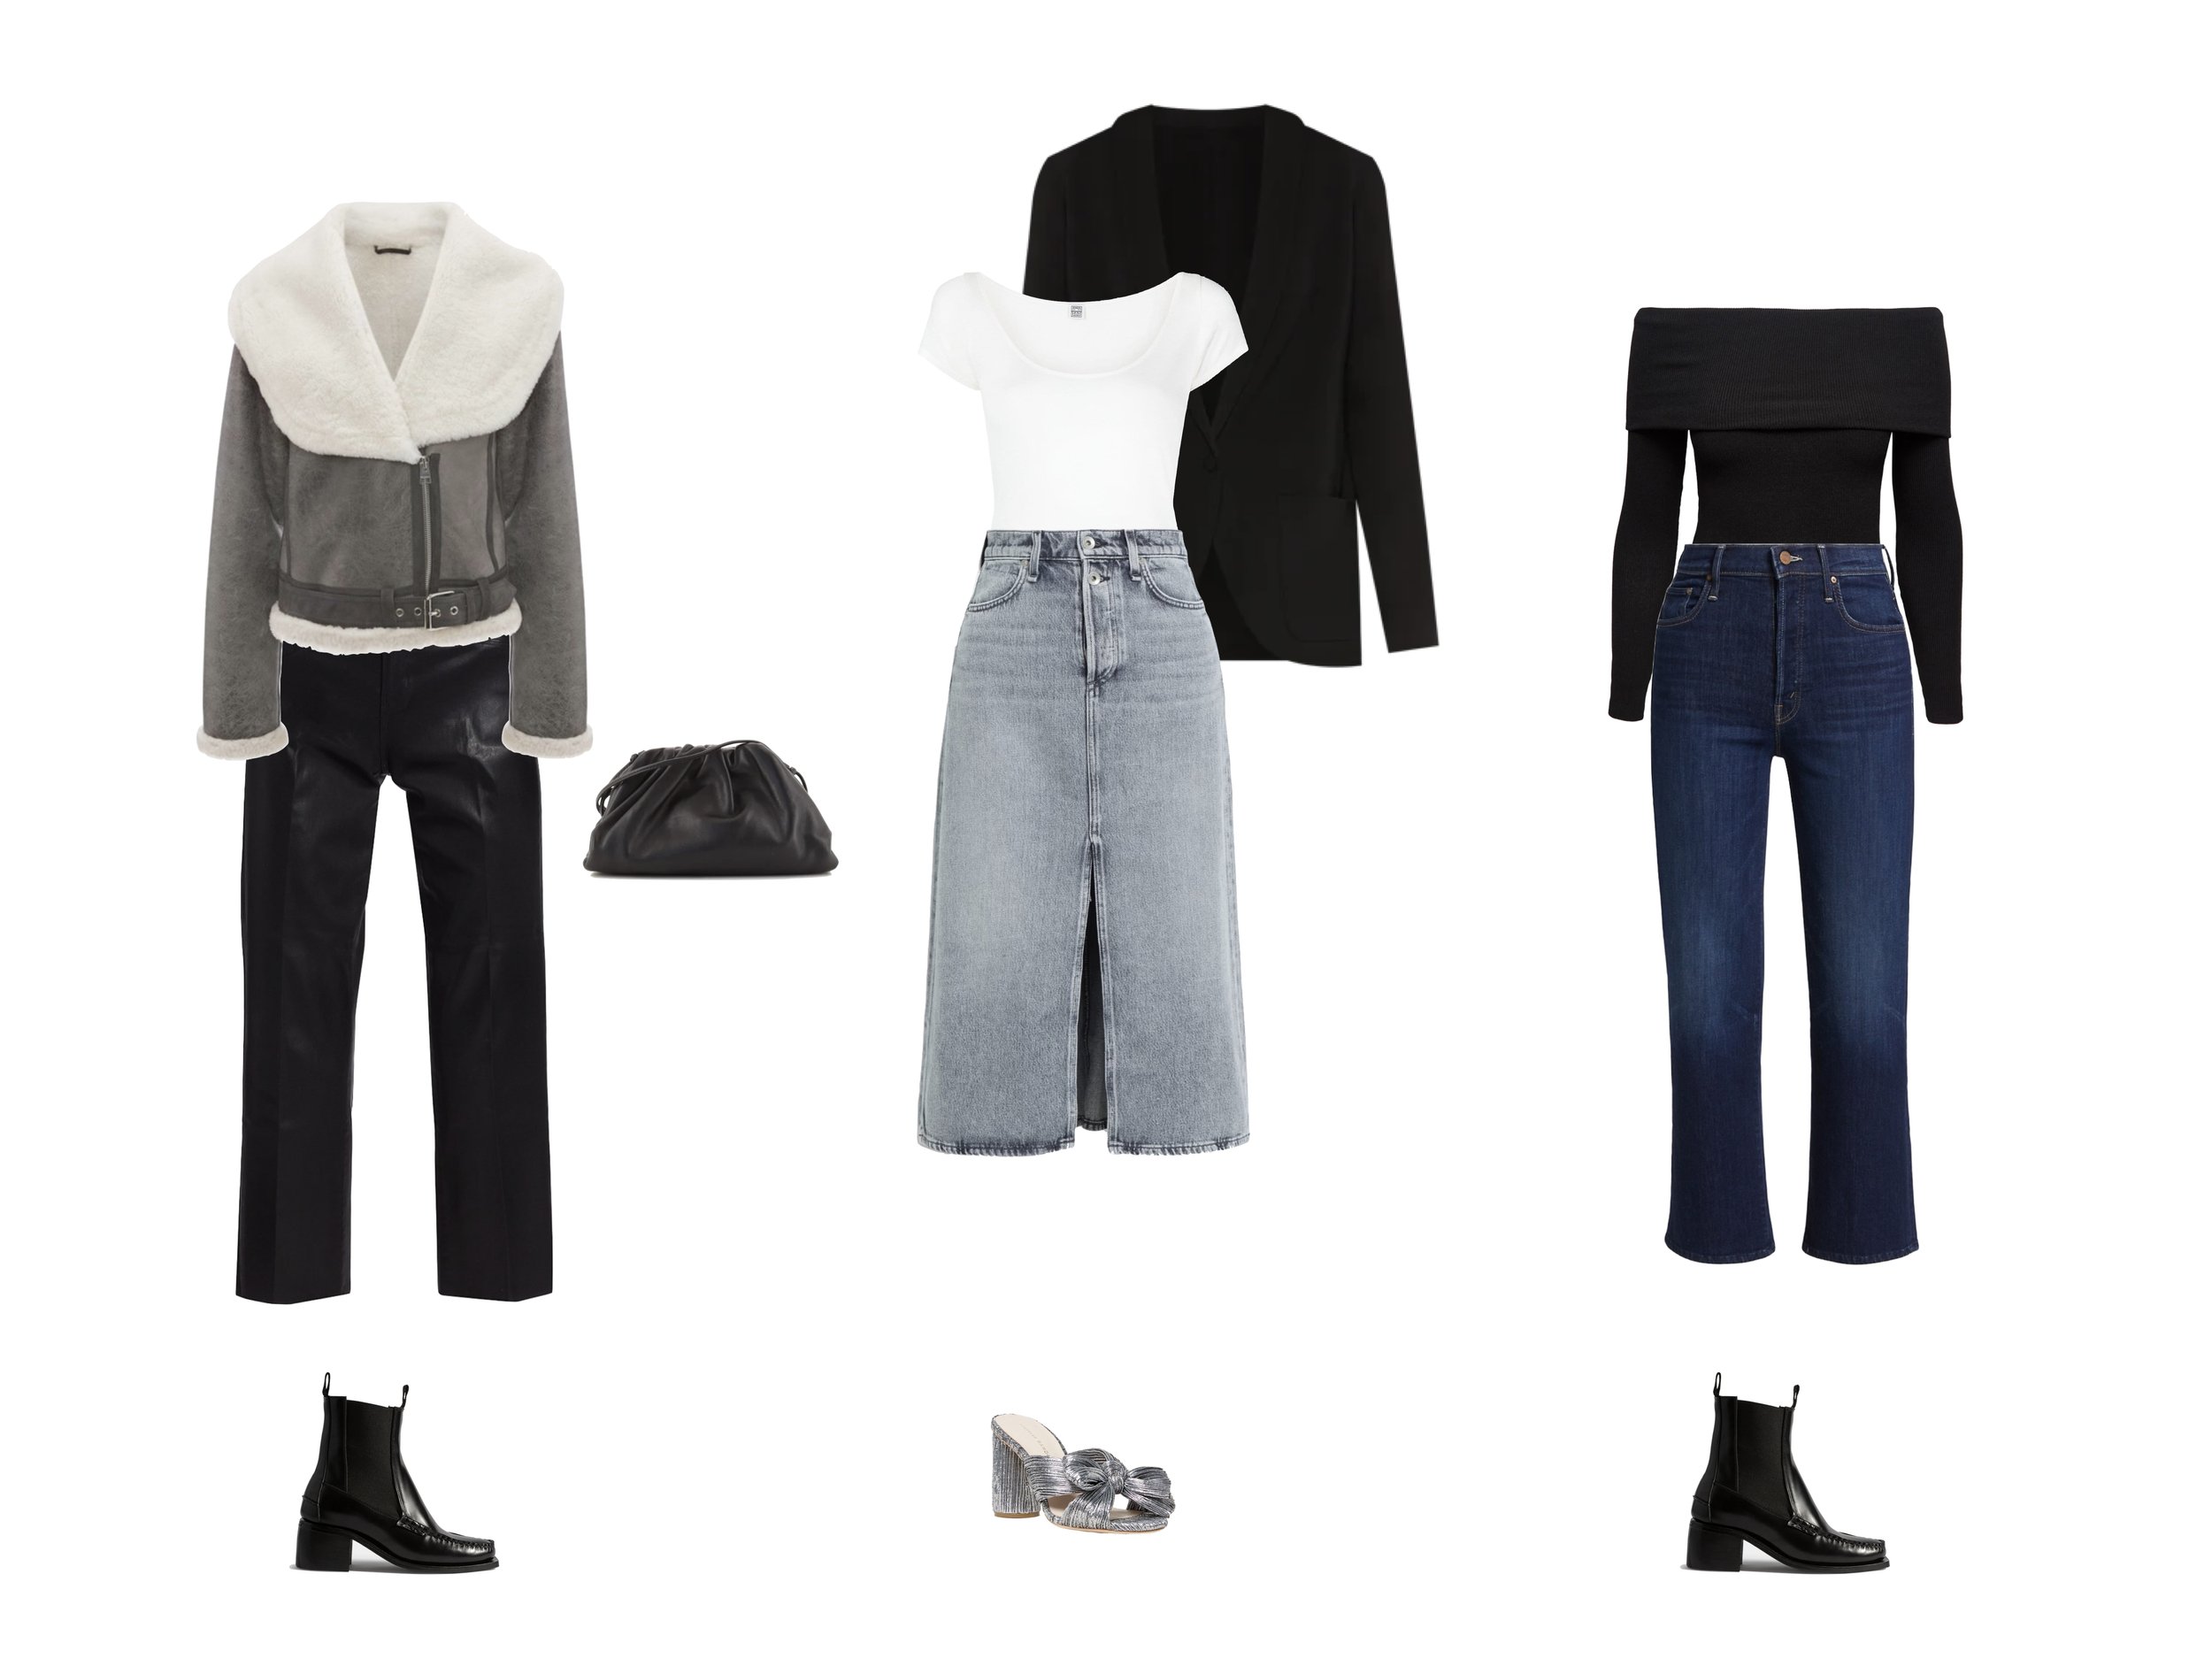 54 SOFT CLASSIC OUTFIT IDEAS  Casual + Edgy Capsule Wardrobe for